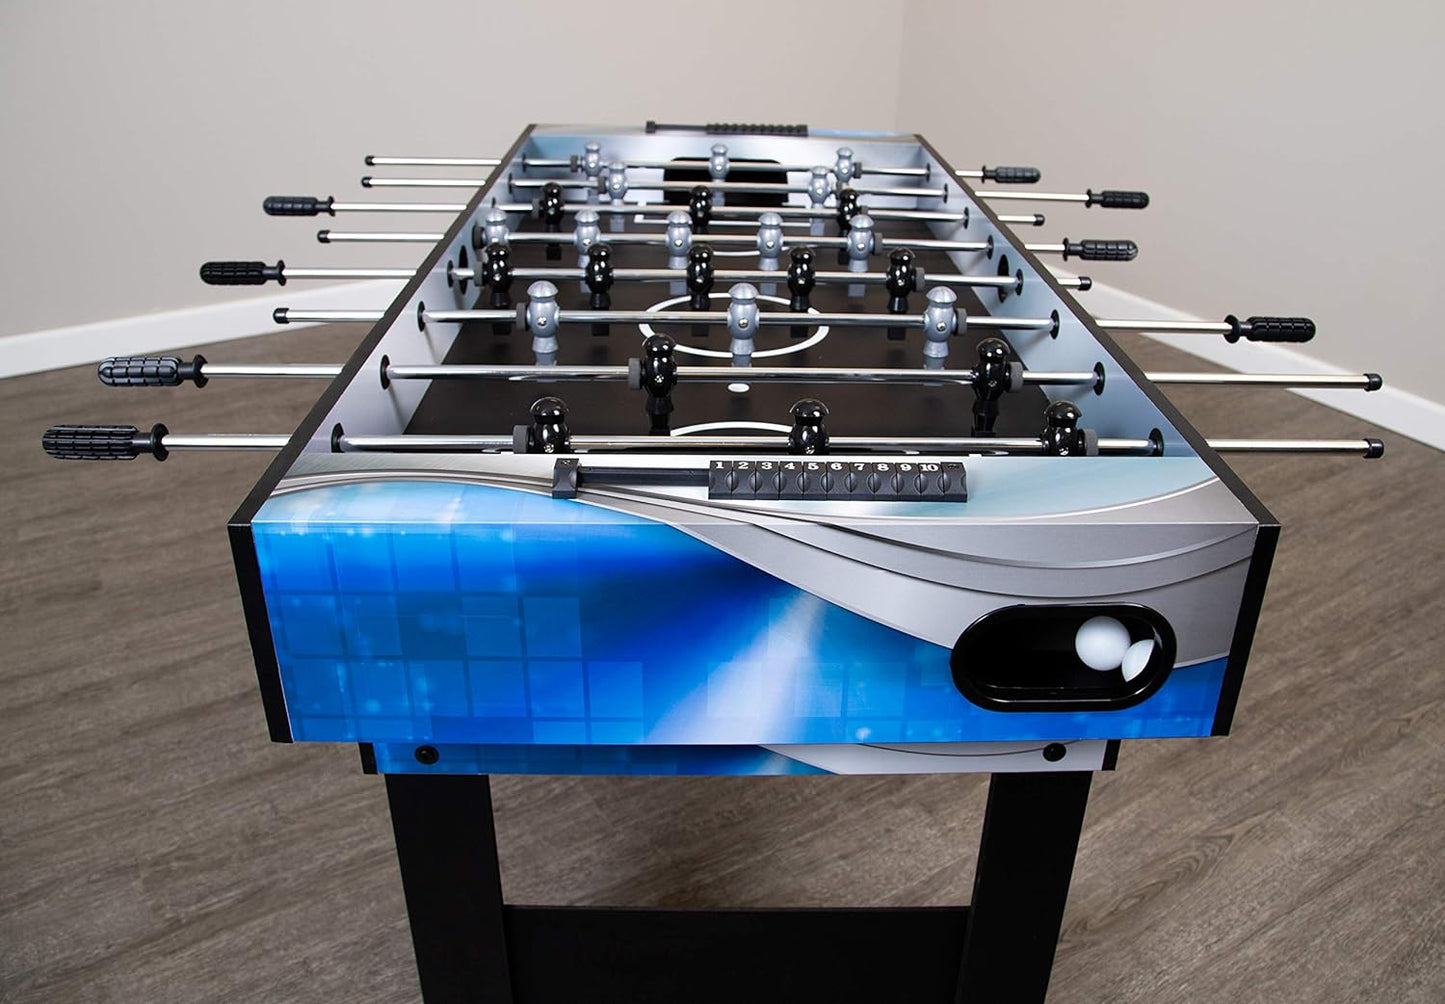 Matrix 54-In 7-In-1 Multi Game Table with Foosball, Pool, Glide Hockey, Table Tennis, Chess, Checkers and Backgammon